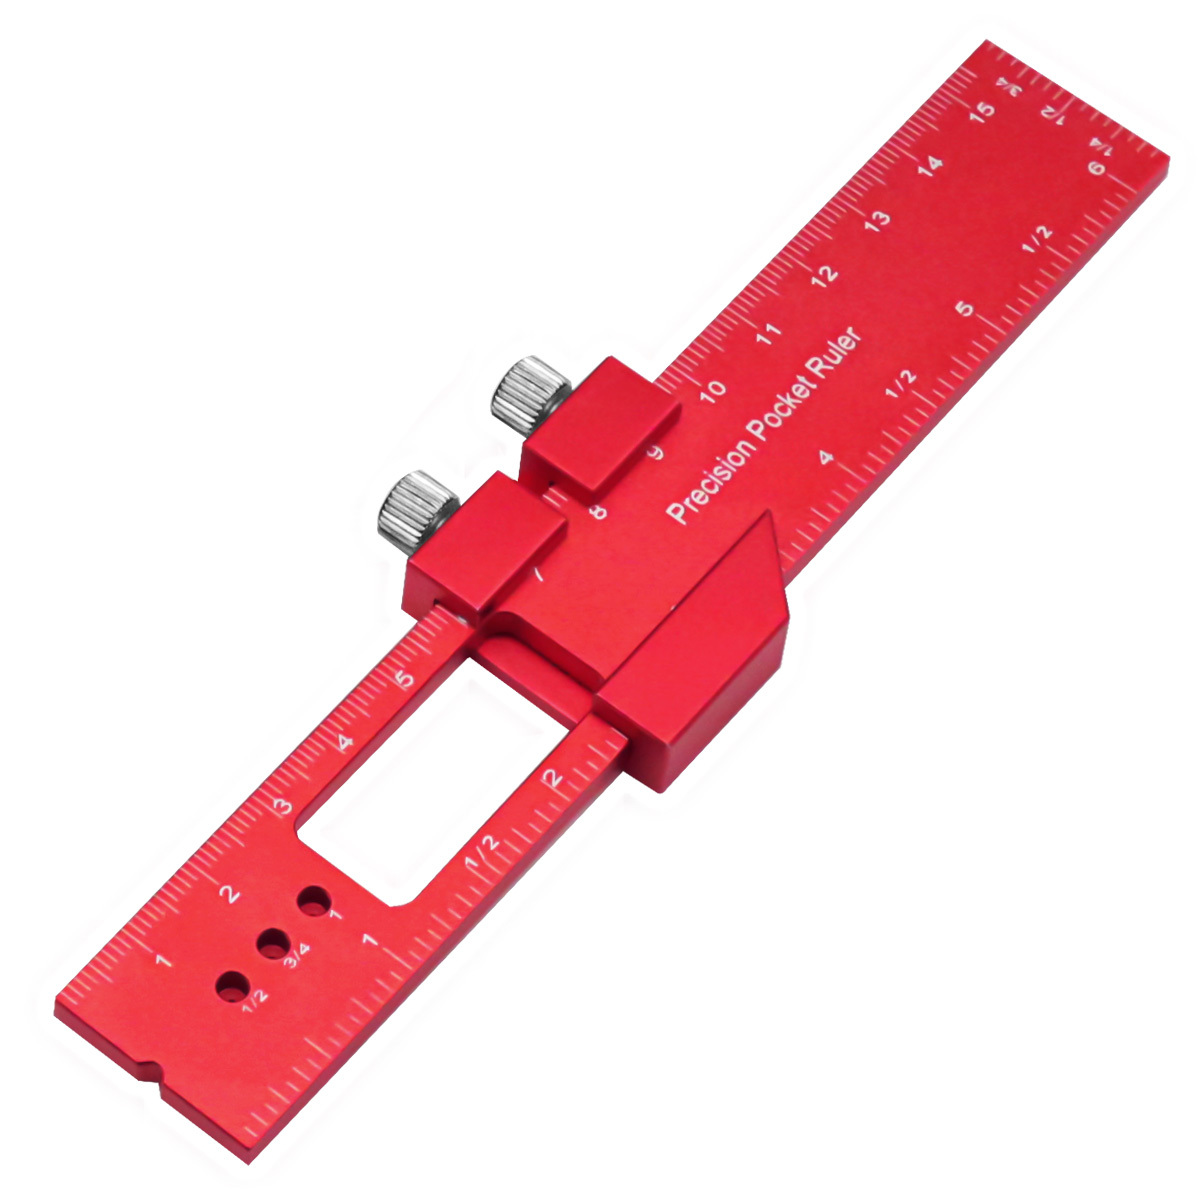 1Pc Steel Ruler Slide Stop Ruler Imperial/Metric Angle Straight Edge Ruler  T Square 45°/90°Precision Woodworking Measuring Ruler - AliExpress